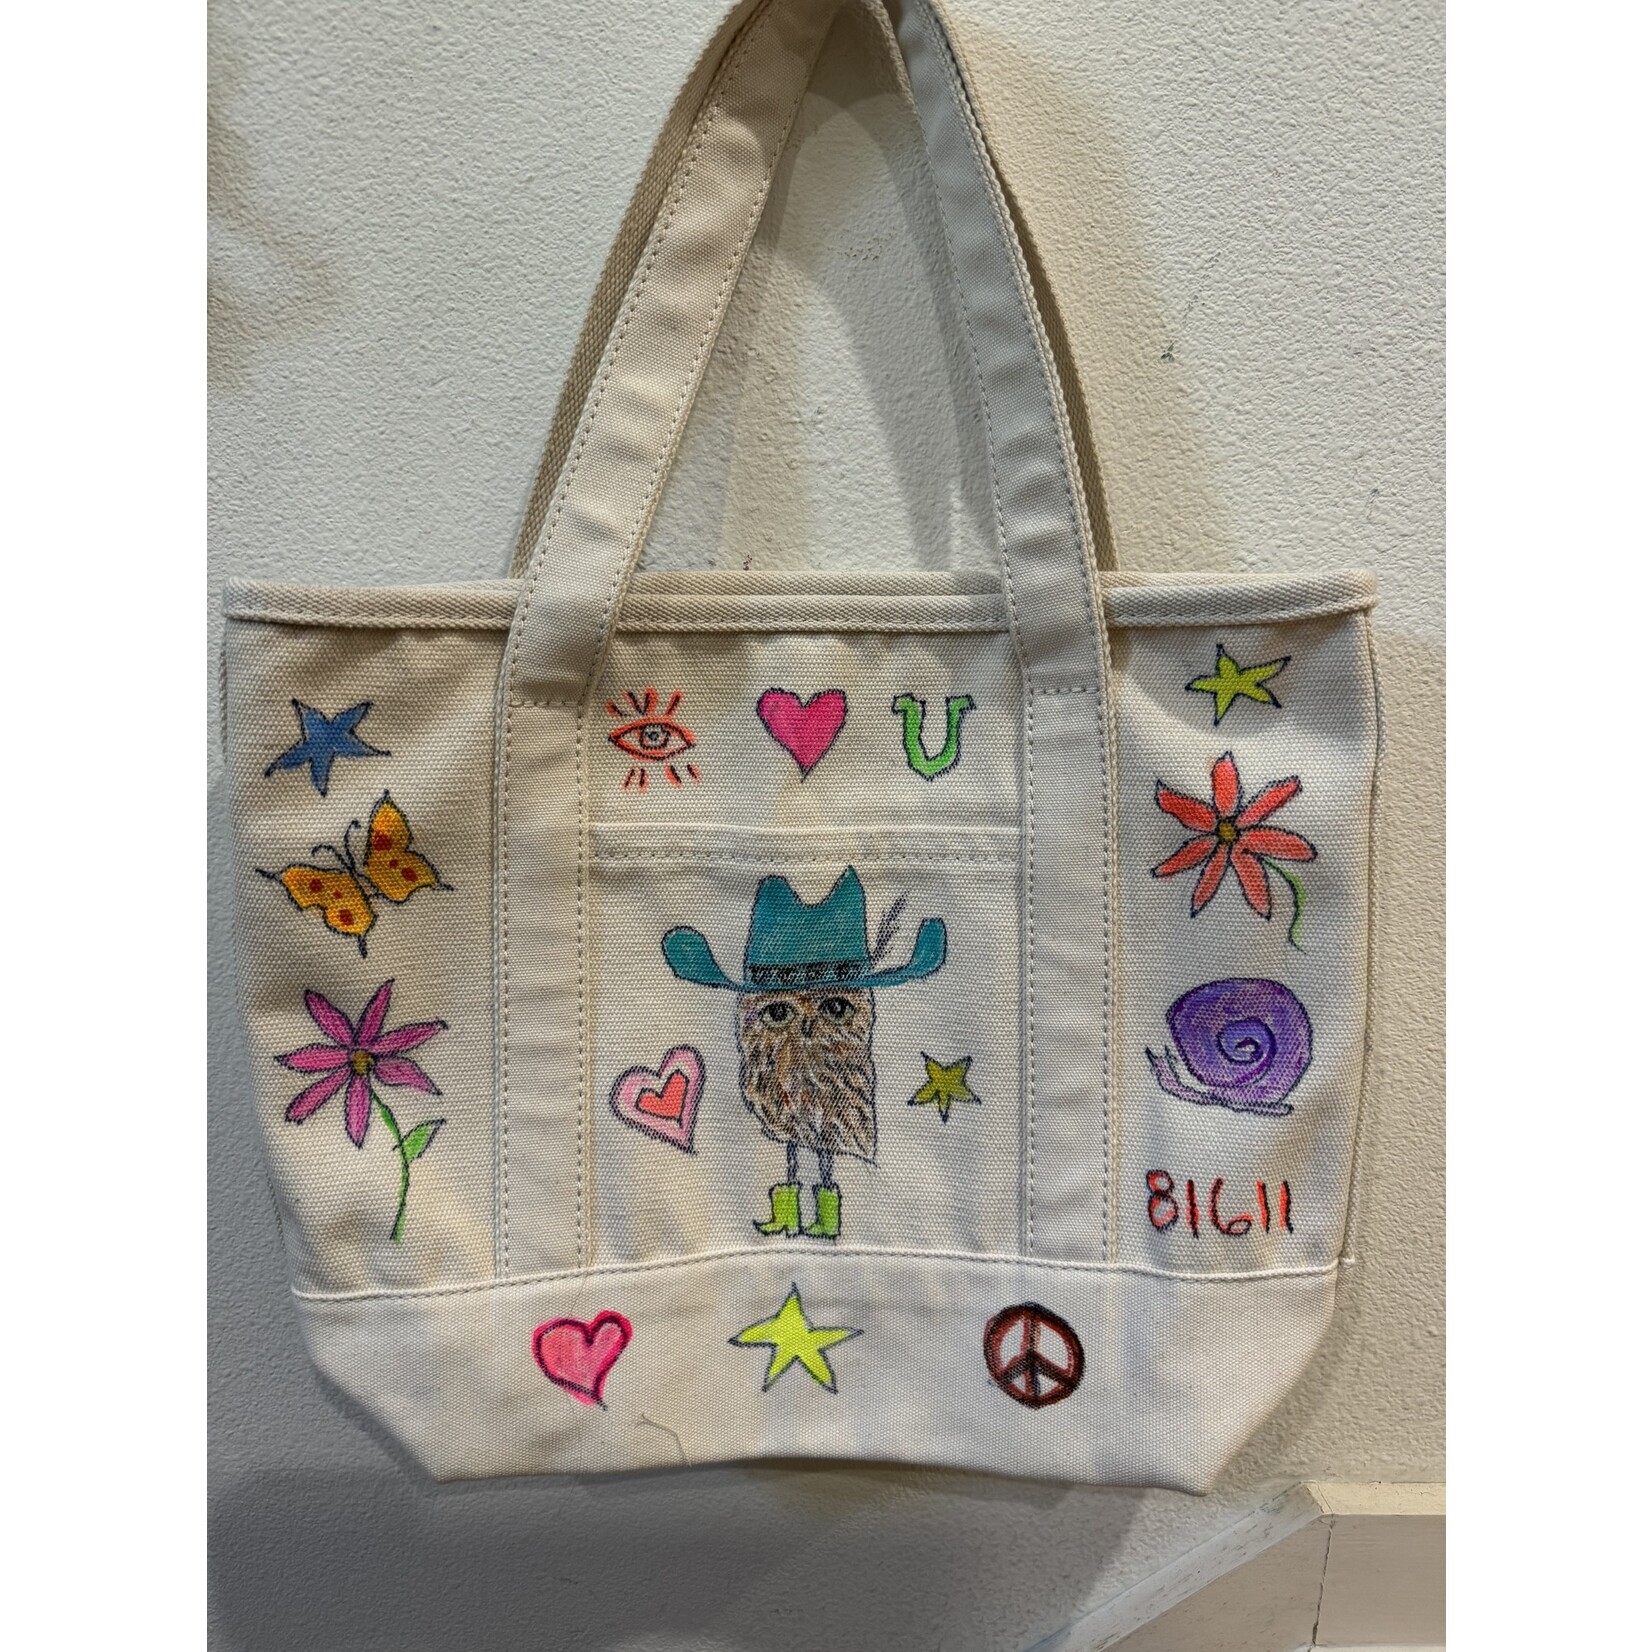 Kim Wyly Hand-Painted Canvas Tote